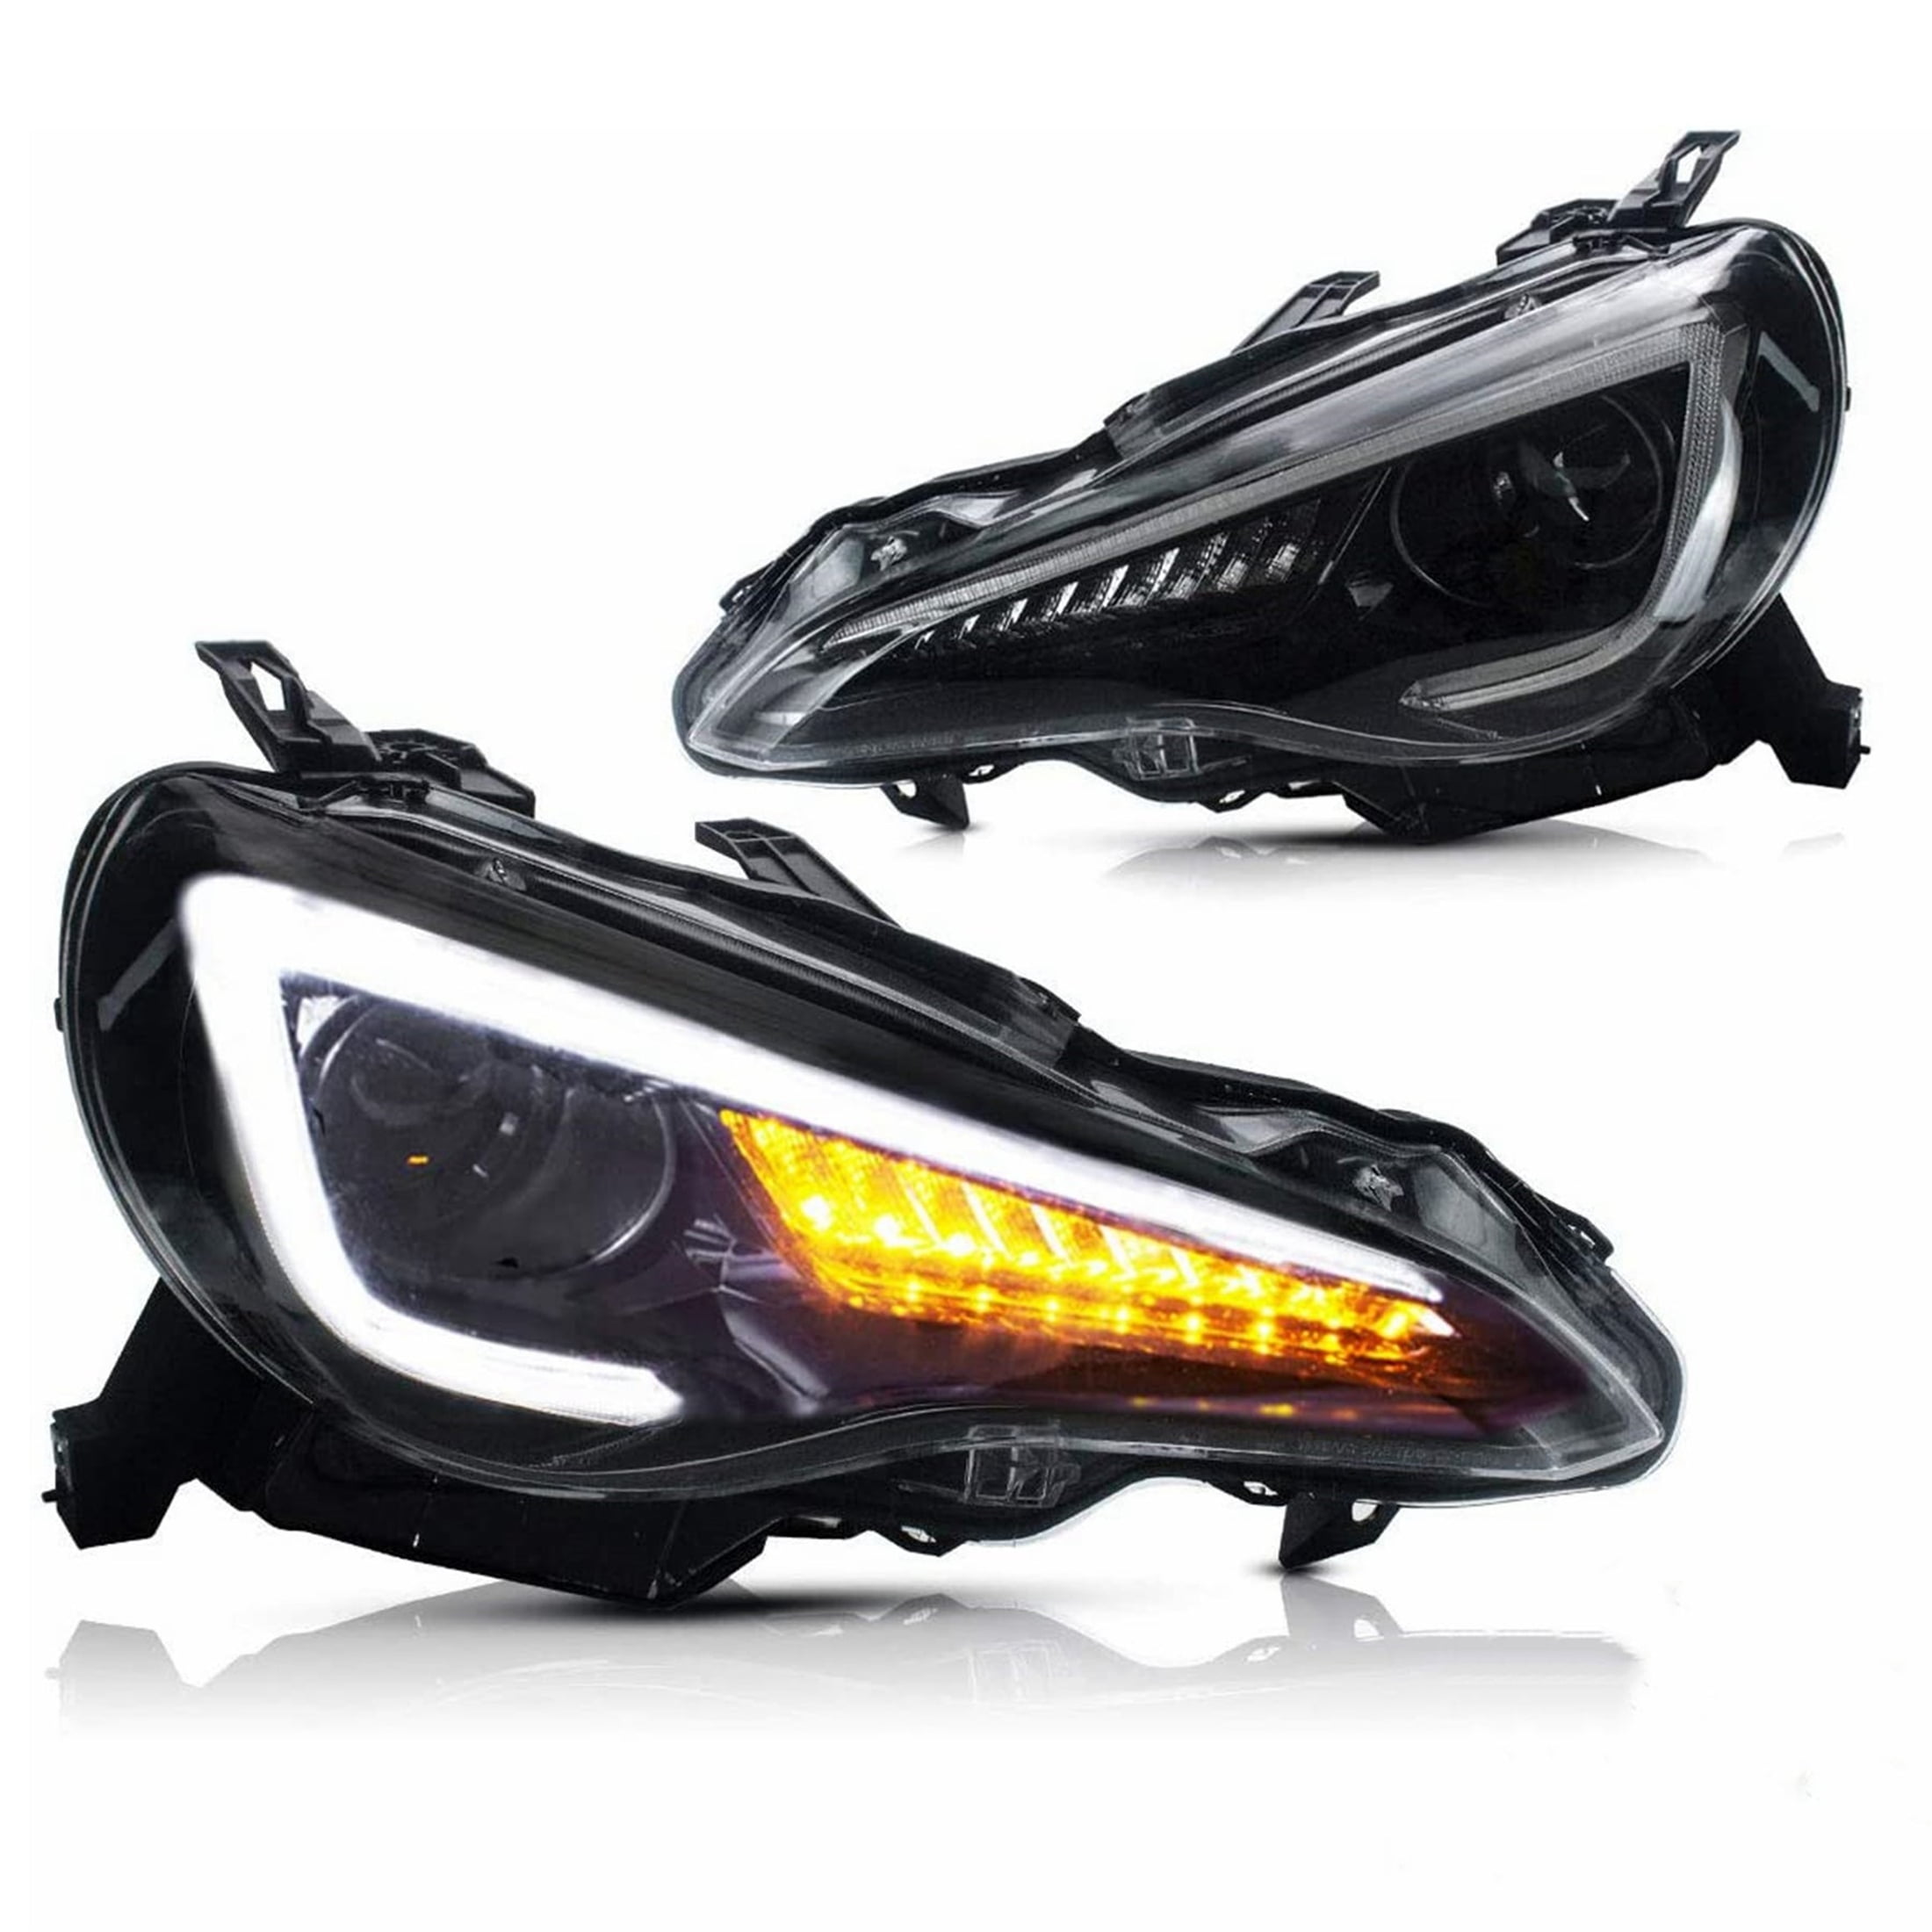 LED Headlight For Toyota 86 Scion FR-S Subaru BRZ With Sequential Indicator  